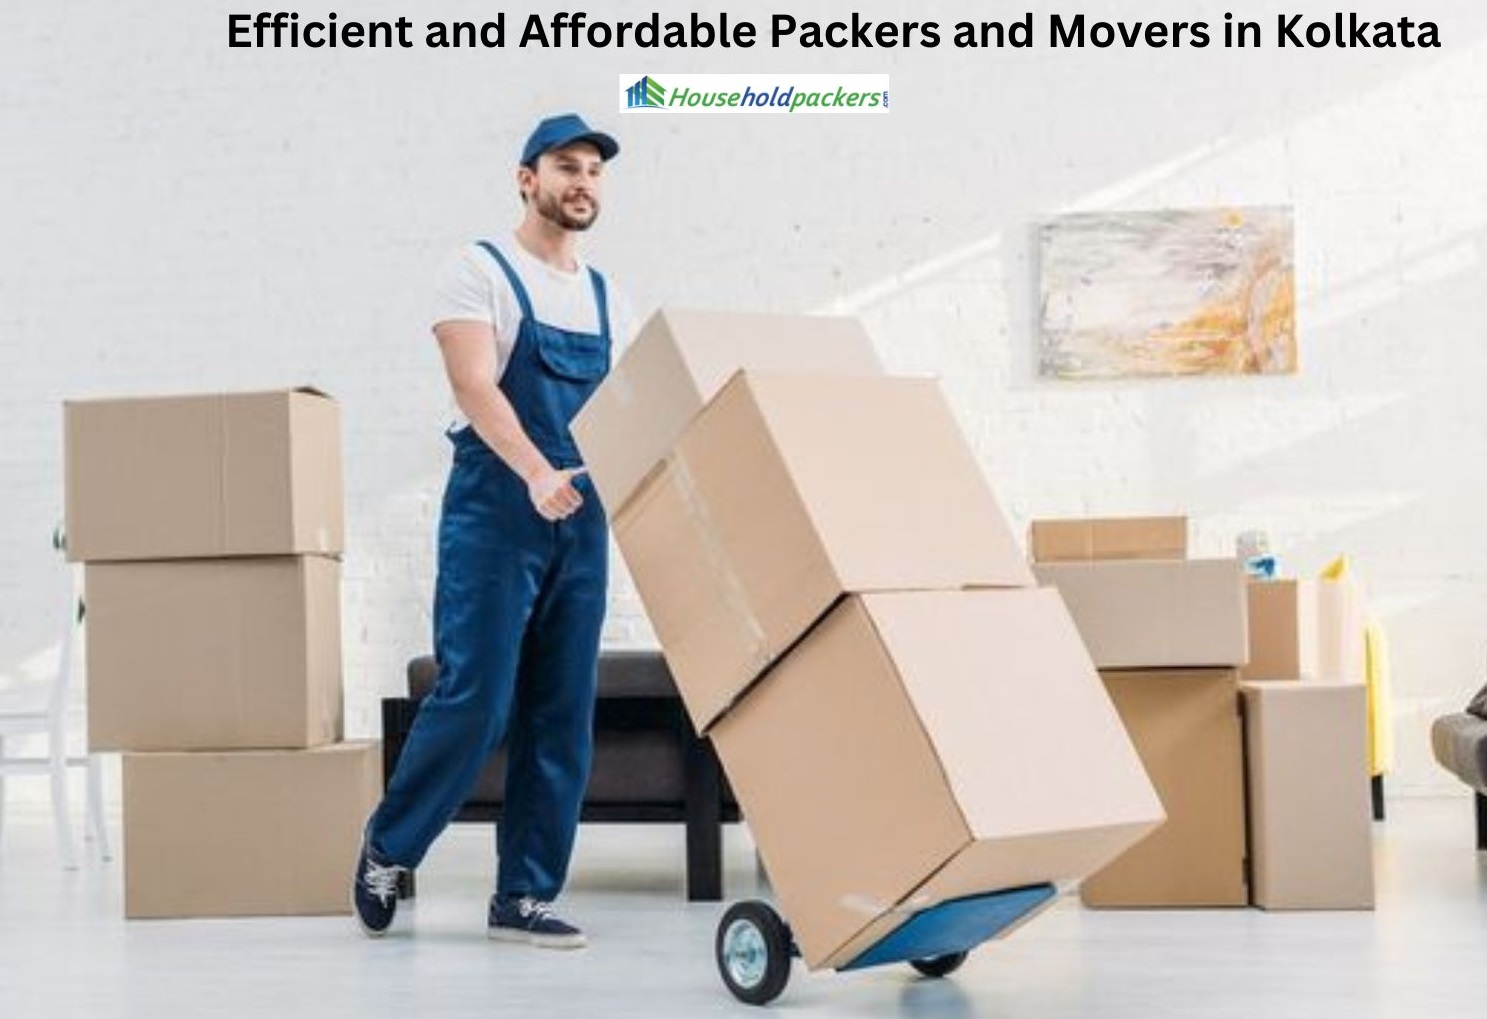 Efficient and Affordable Packers and Movers in Kolkata